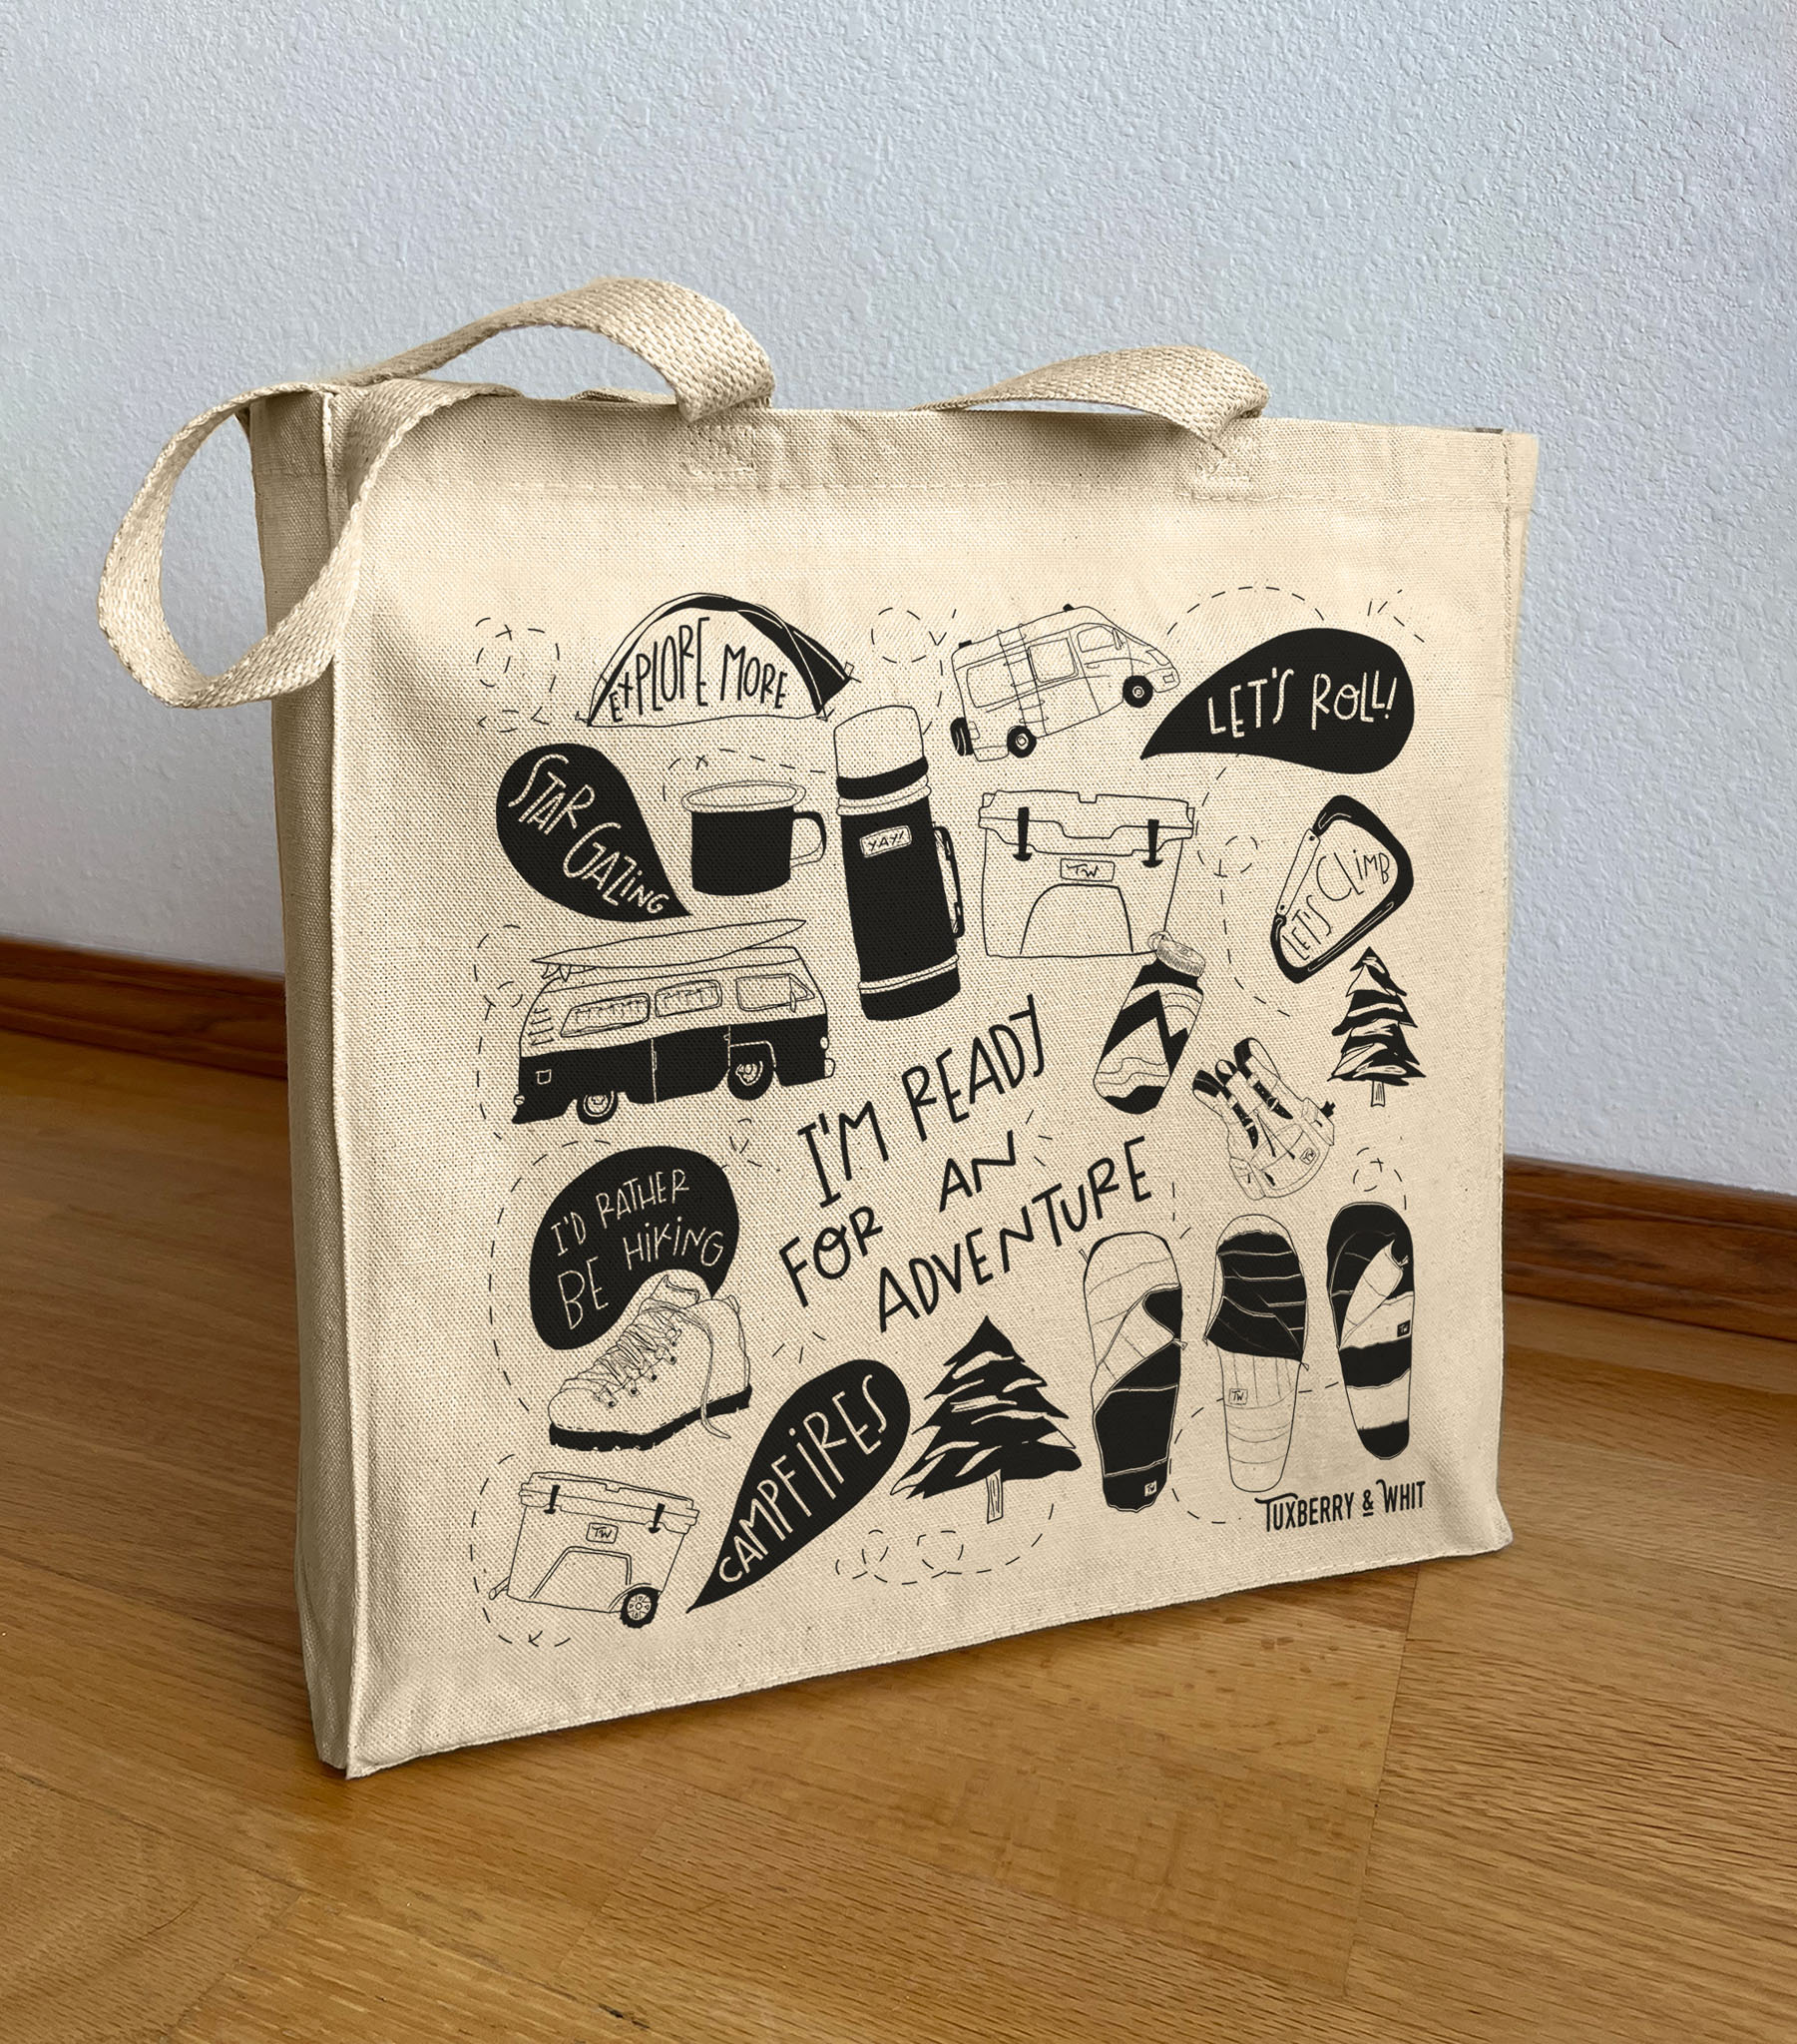 Fun illustrated canvas bag with drawings of camping items.